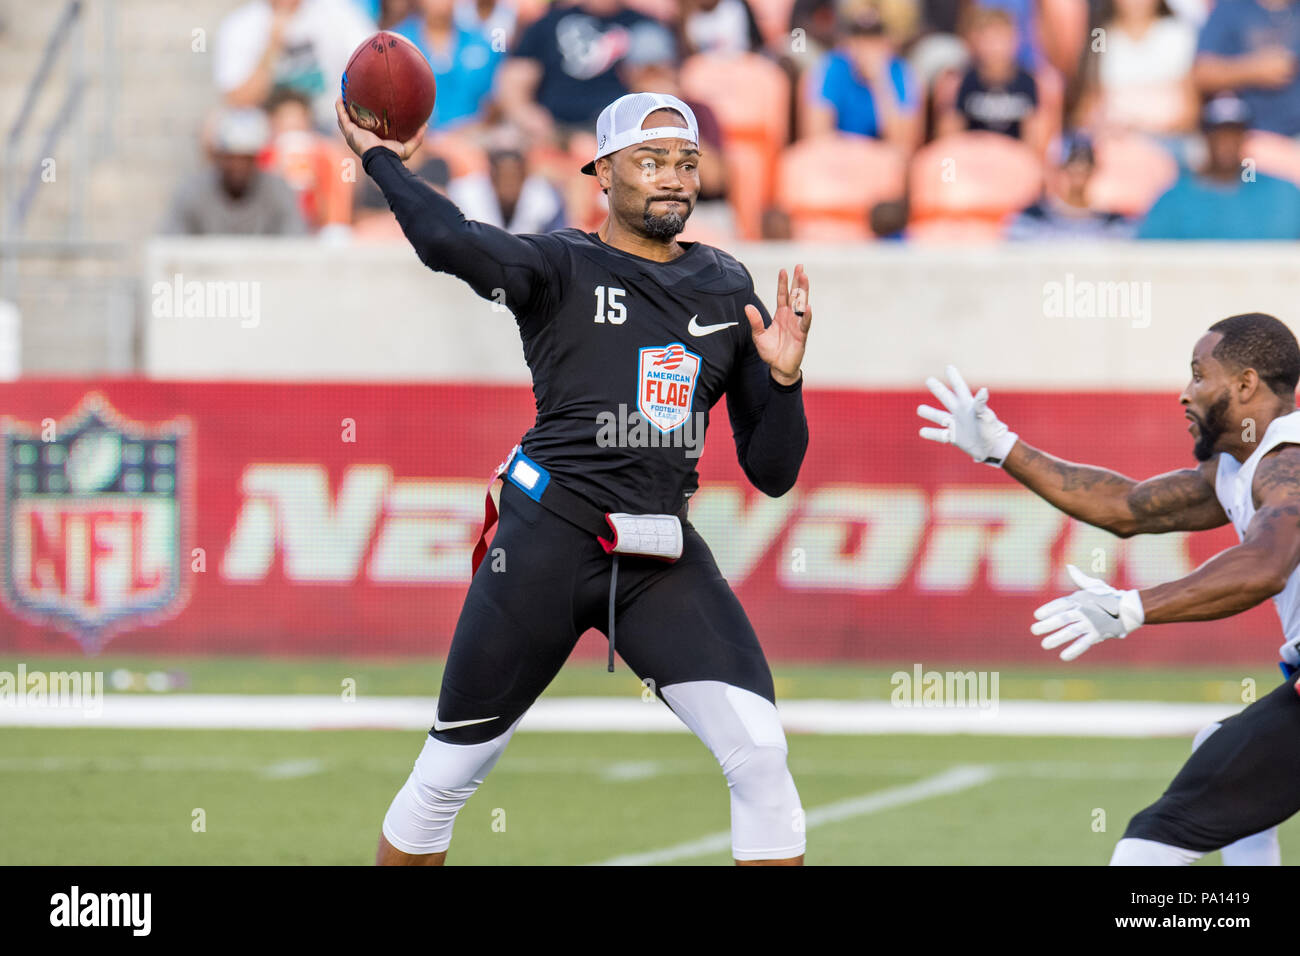 Houston, TX, USA. 19th July, 2018. Godspeed quarterback Seneca Wallace (15) throws a pass during the American Flag Football League Ultimate Final between Godspeed and Fighting Cancer at BBVA Compass Stadium in Houston, TX. Trask Smith/CSM/Alamy Live News Stock Photo